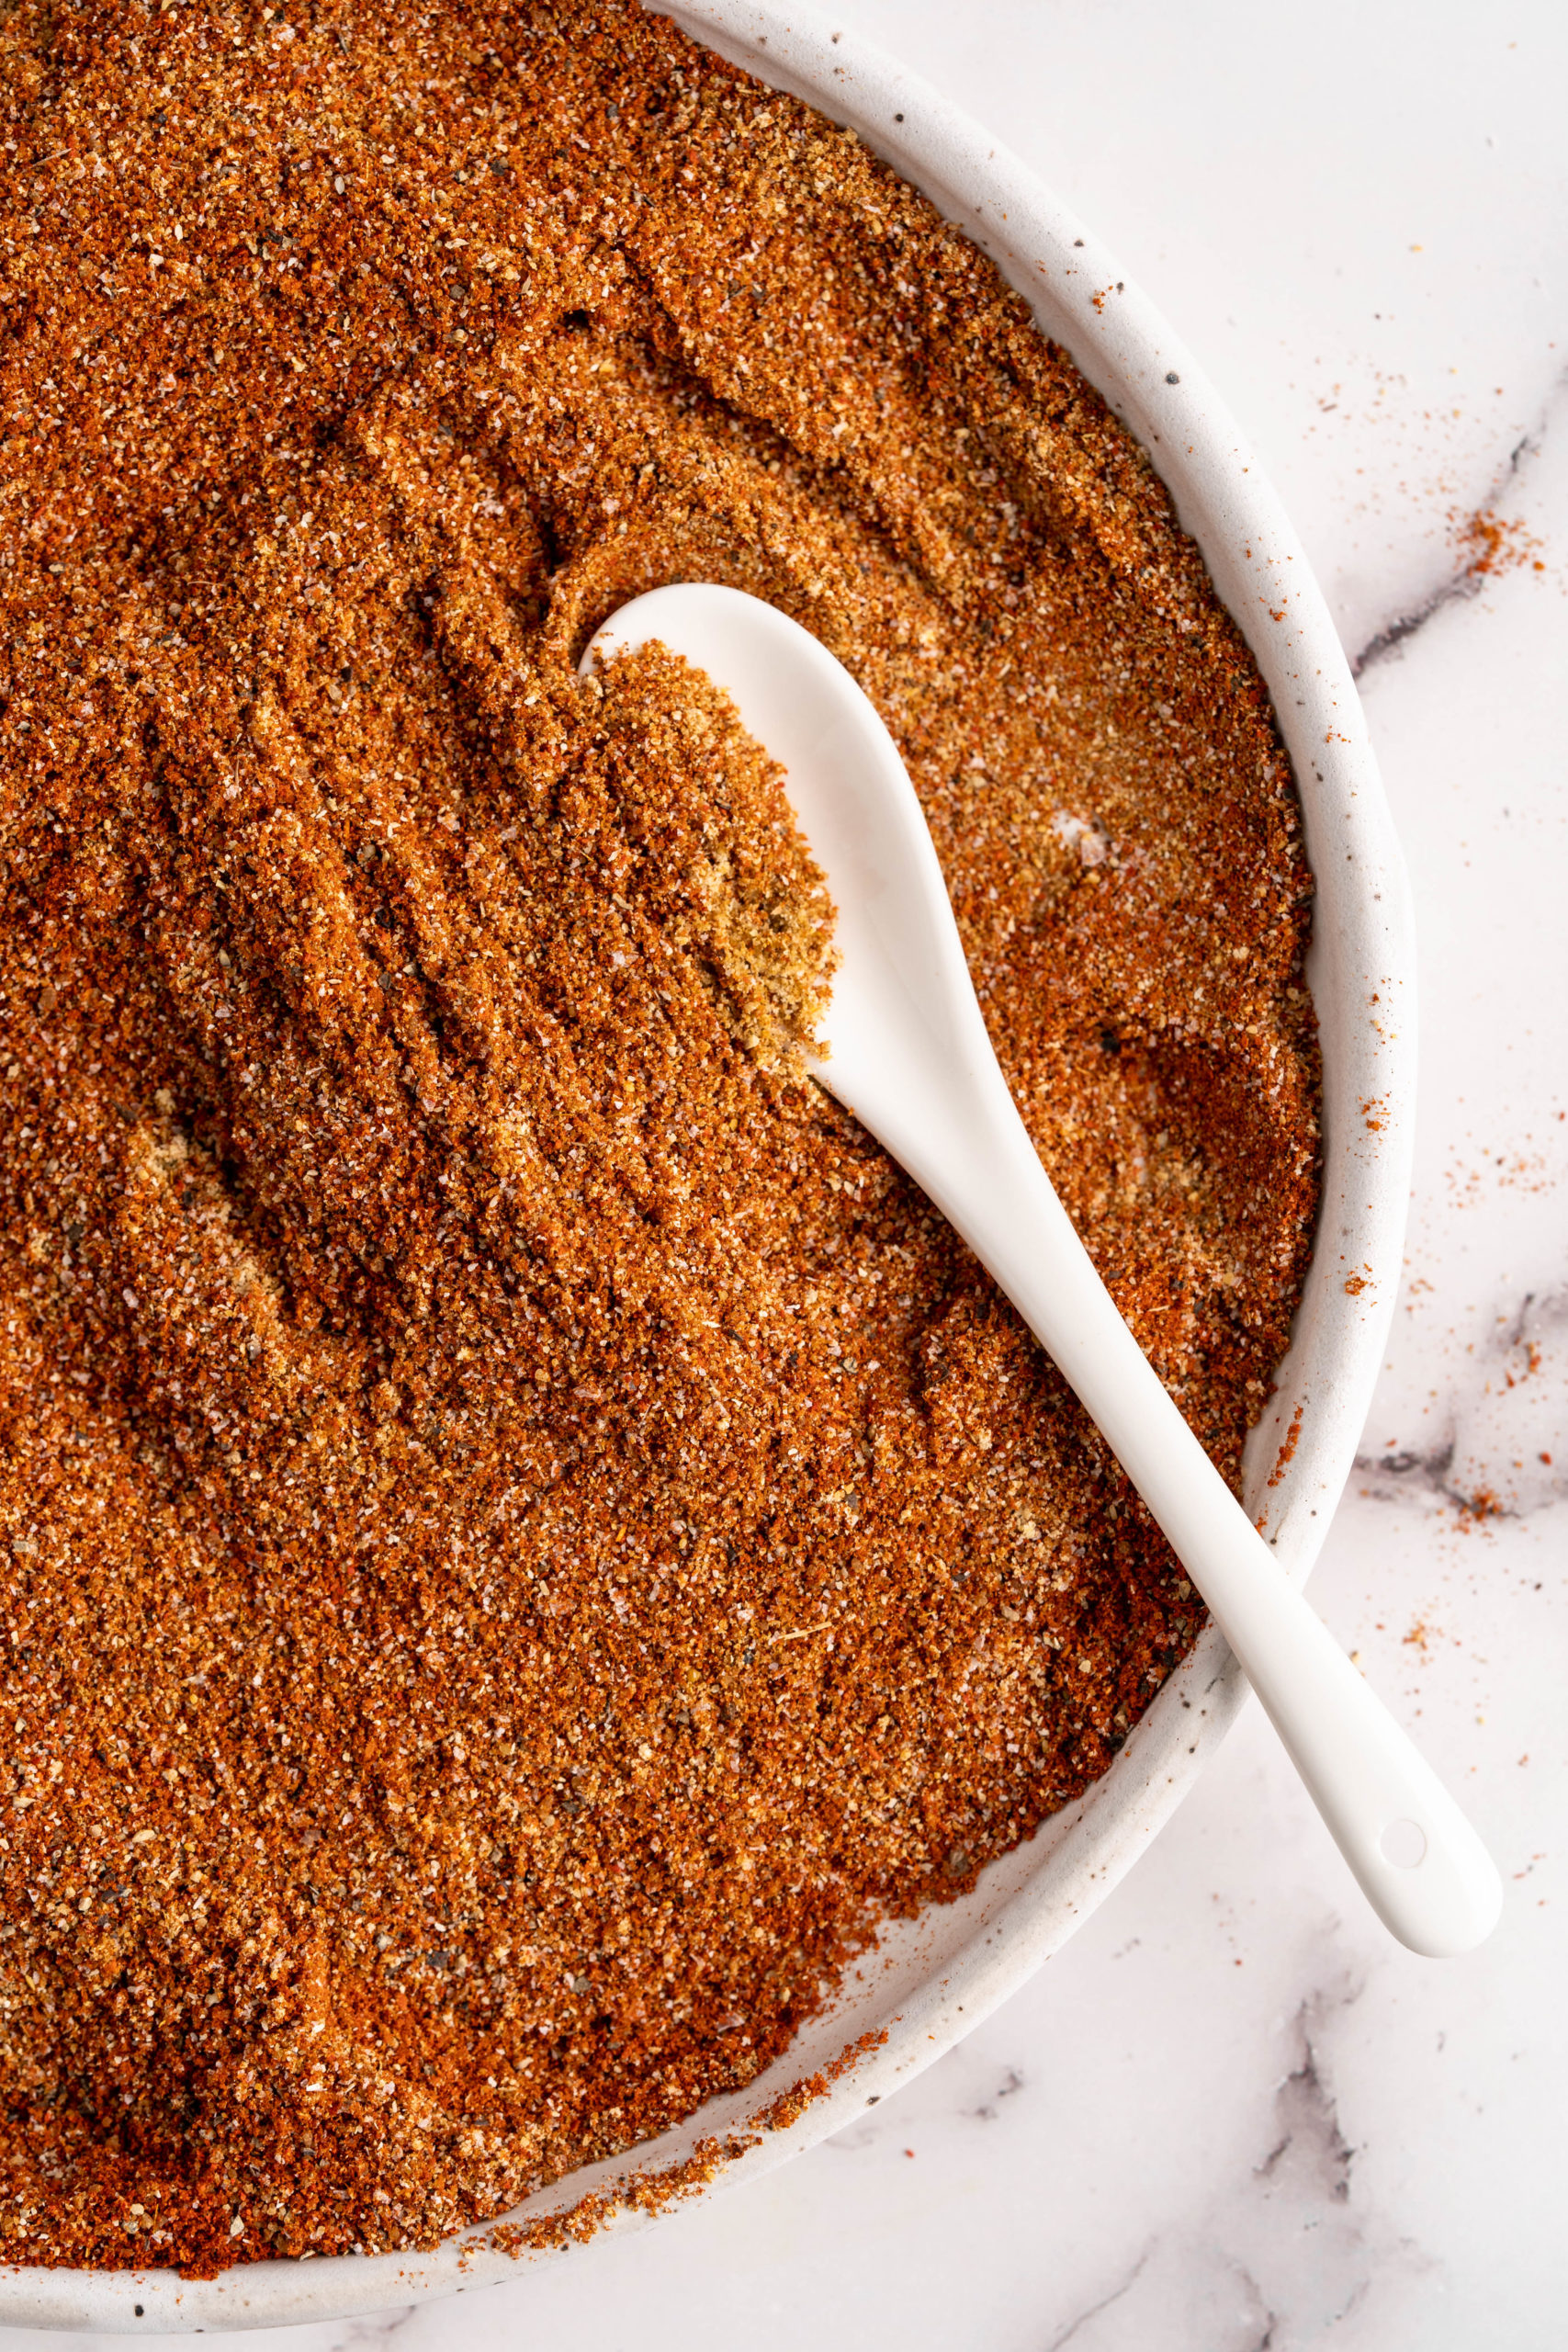 Large bowl of BBQ spice rub with spoon